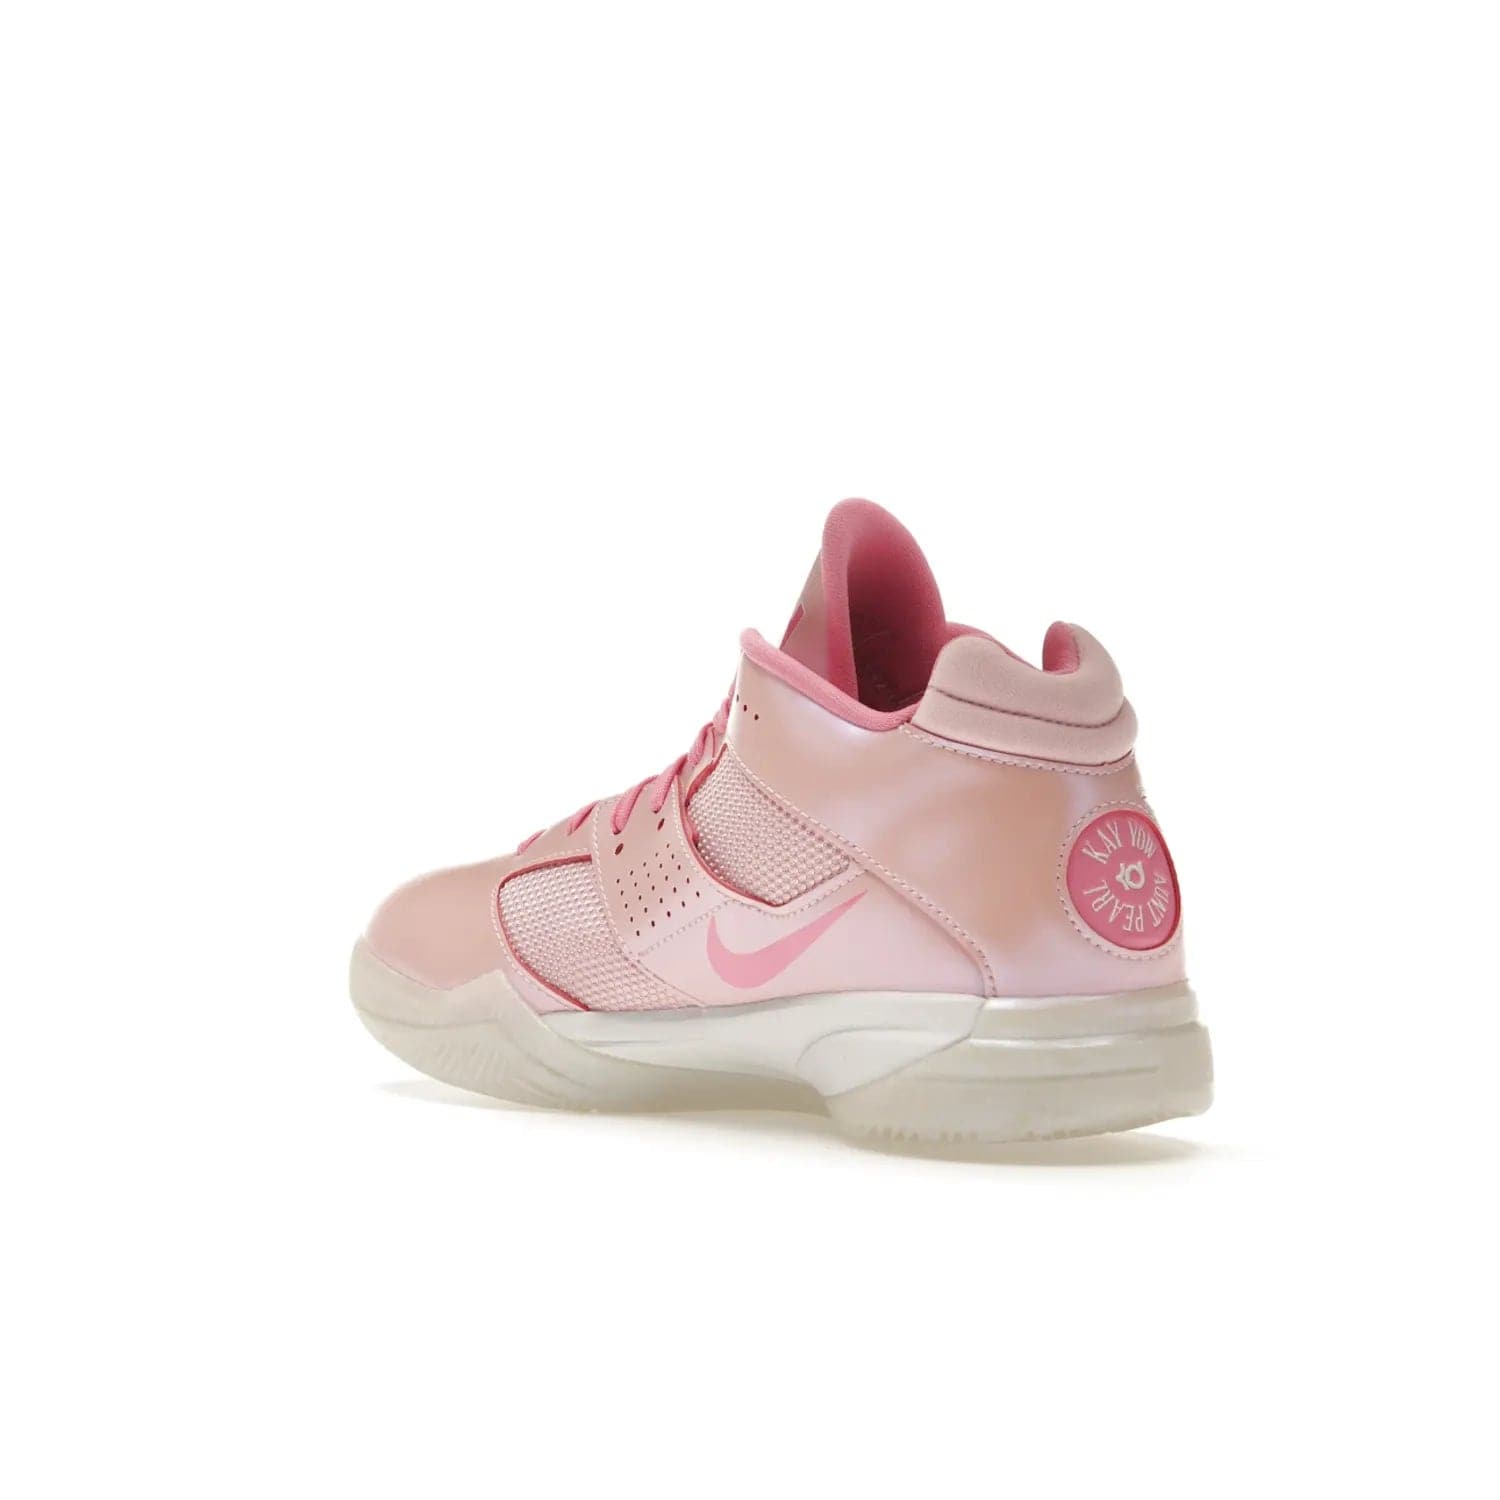 Nike KD 3 Aunt Pearl - Image 24 - Only at www.BallersClubKickz.com - Introducing the Nike KD 3 Aunt Pearl. Featuring a bold Medium Soft Pink, White, & Lotus Pink colorway. Get ready to stand out this October 15th.